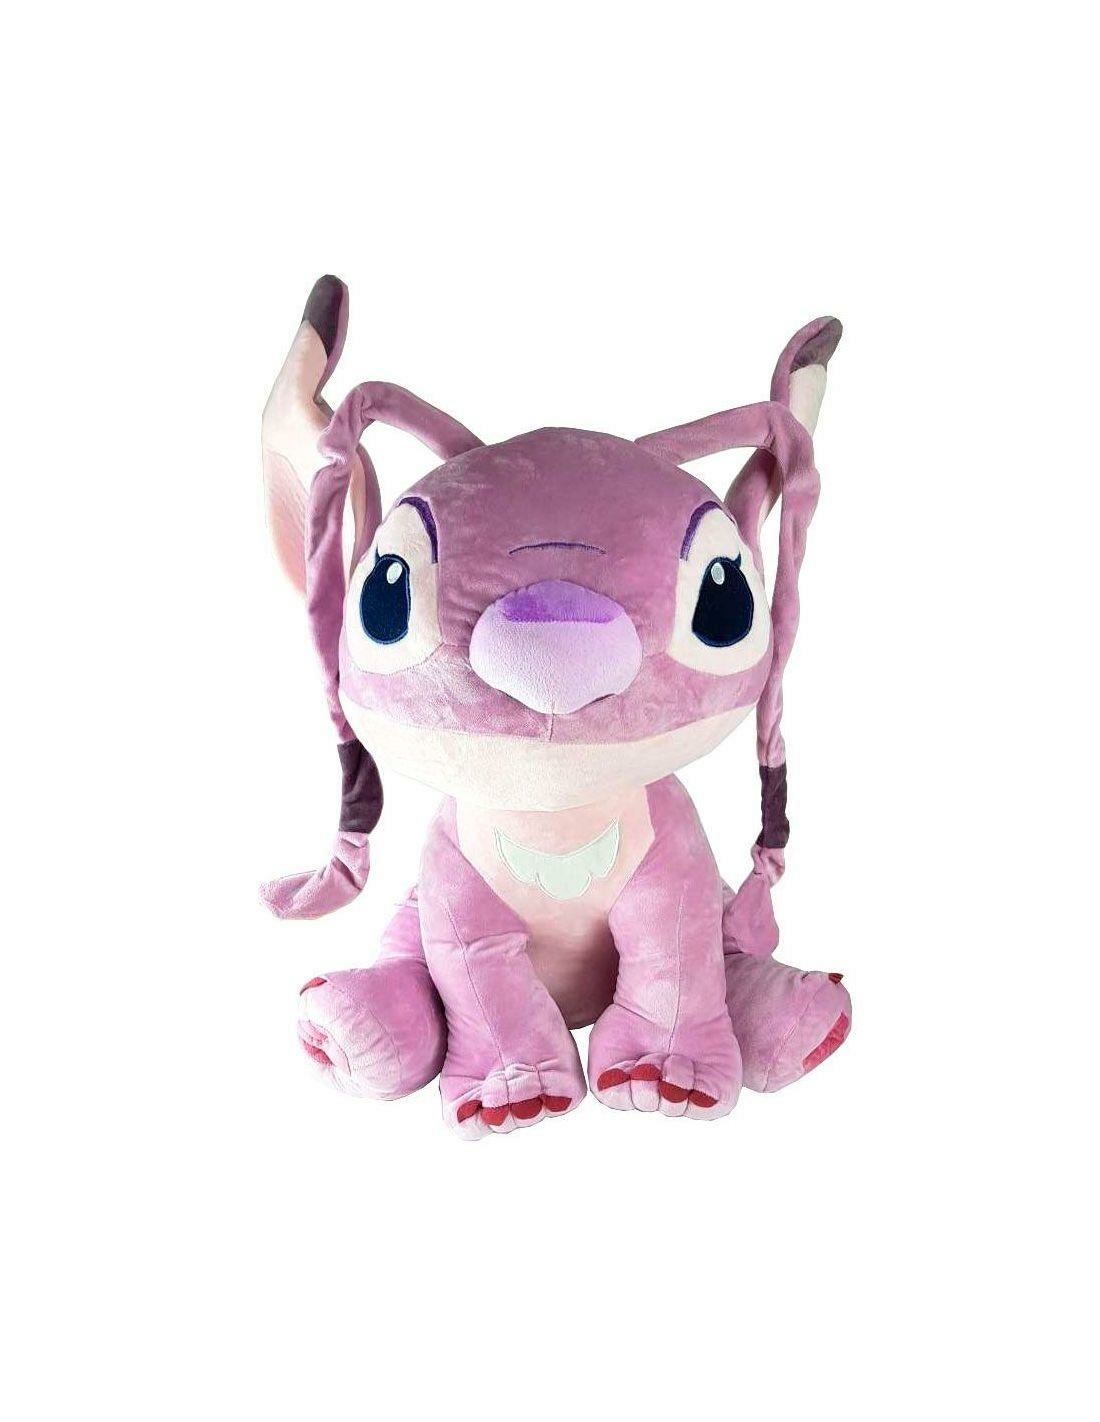 https://www.reference-gaming.com/assets/media/product/117564/lilo-stitch-peluche-angel-60cm.jpg?format=product-cover-large&k=1606799999